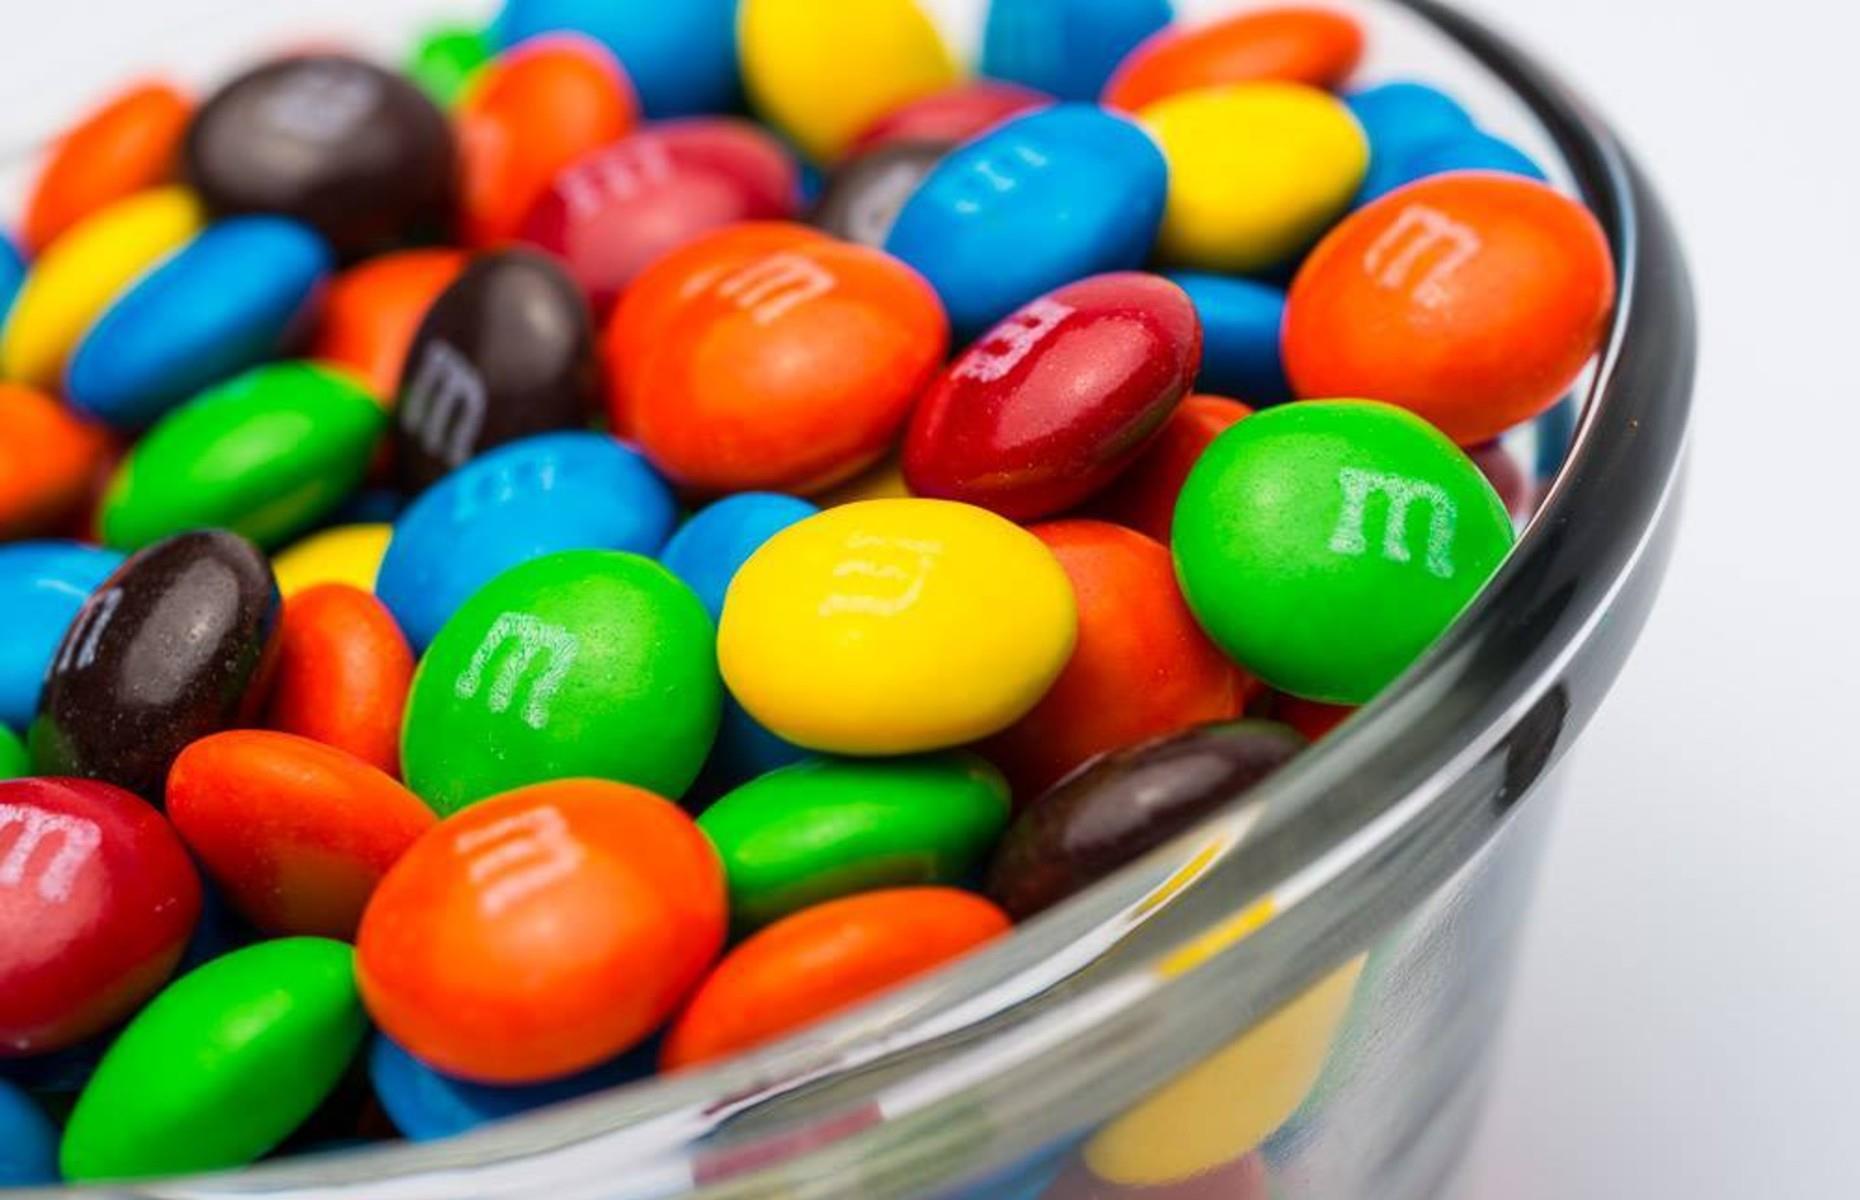 My M&M's: Exclusive, Colorful Offer for YOU!